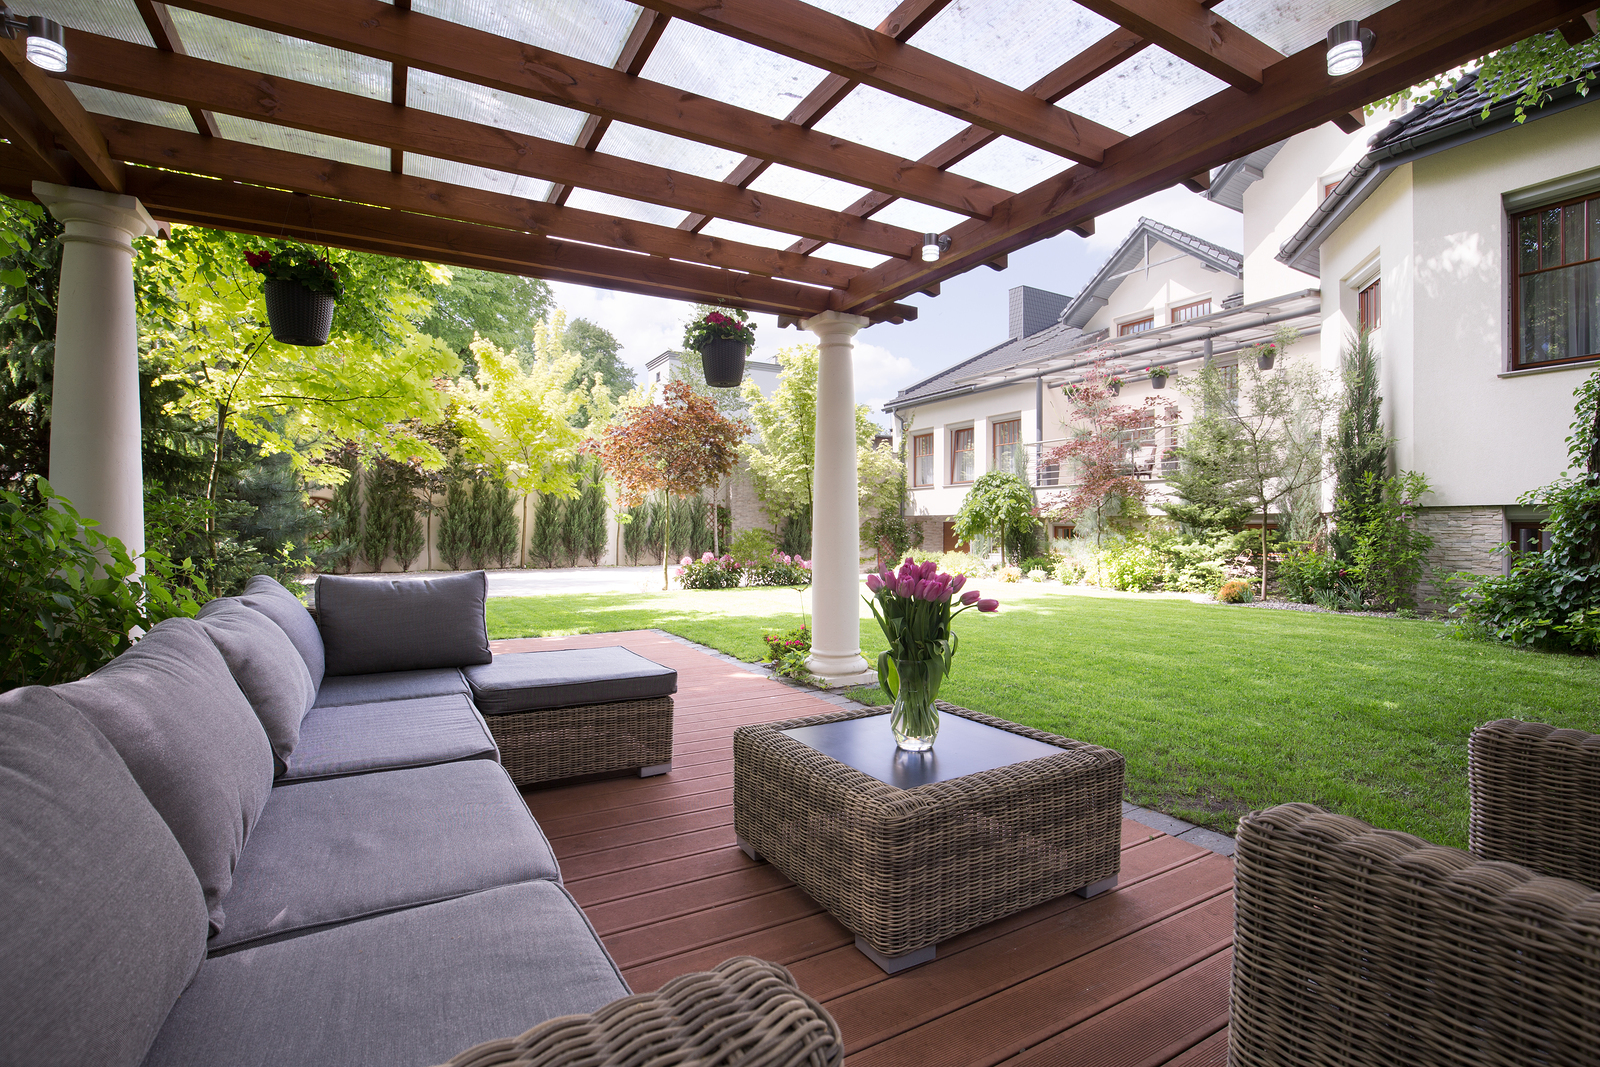 Summer Projects for Creating the Ultimate Backyard: Add Ample Seating